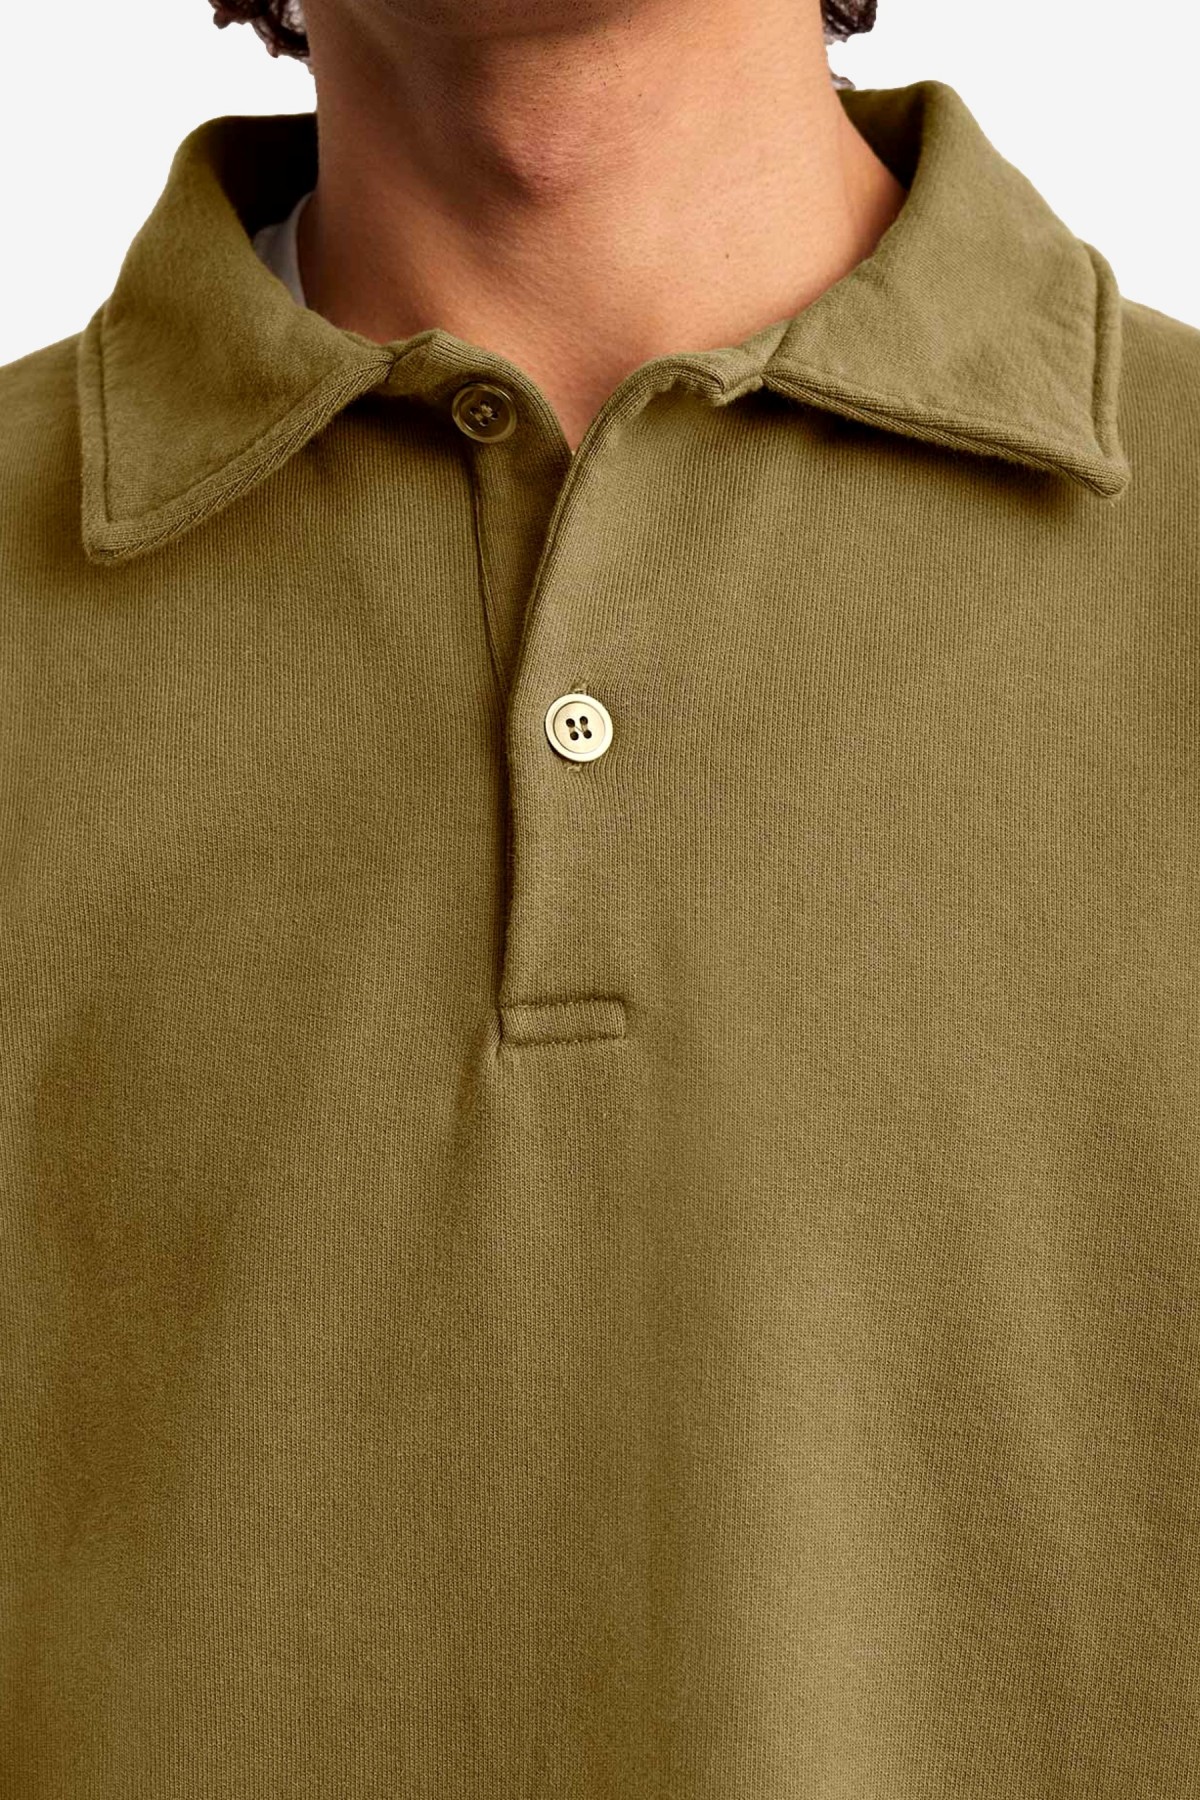 Another Aspect Polo Shirt 1.0 in Forest Green